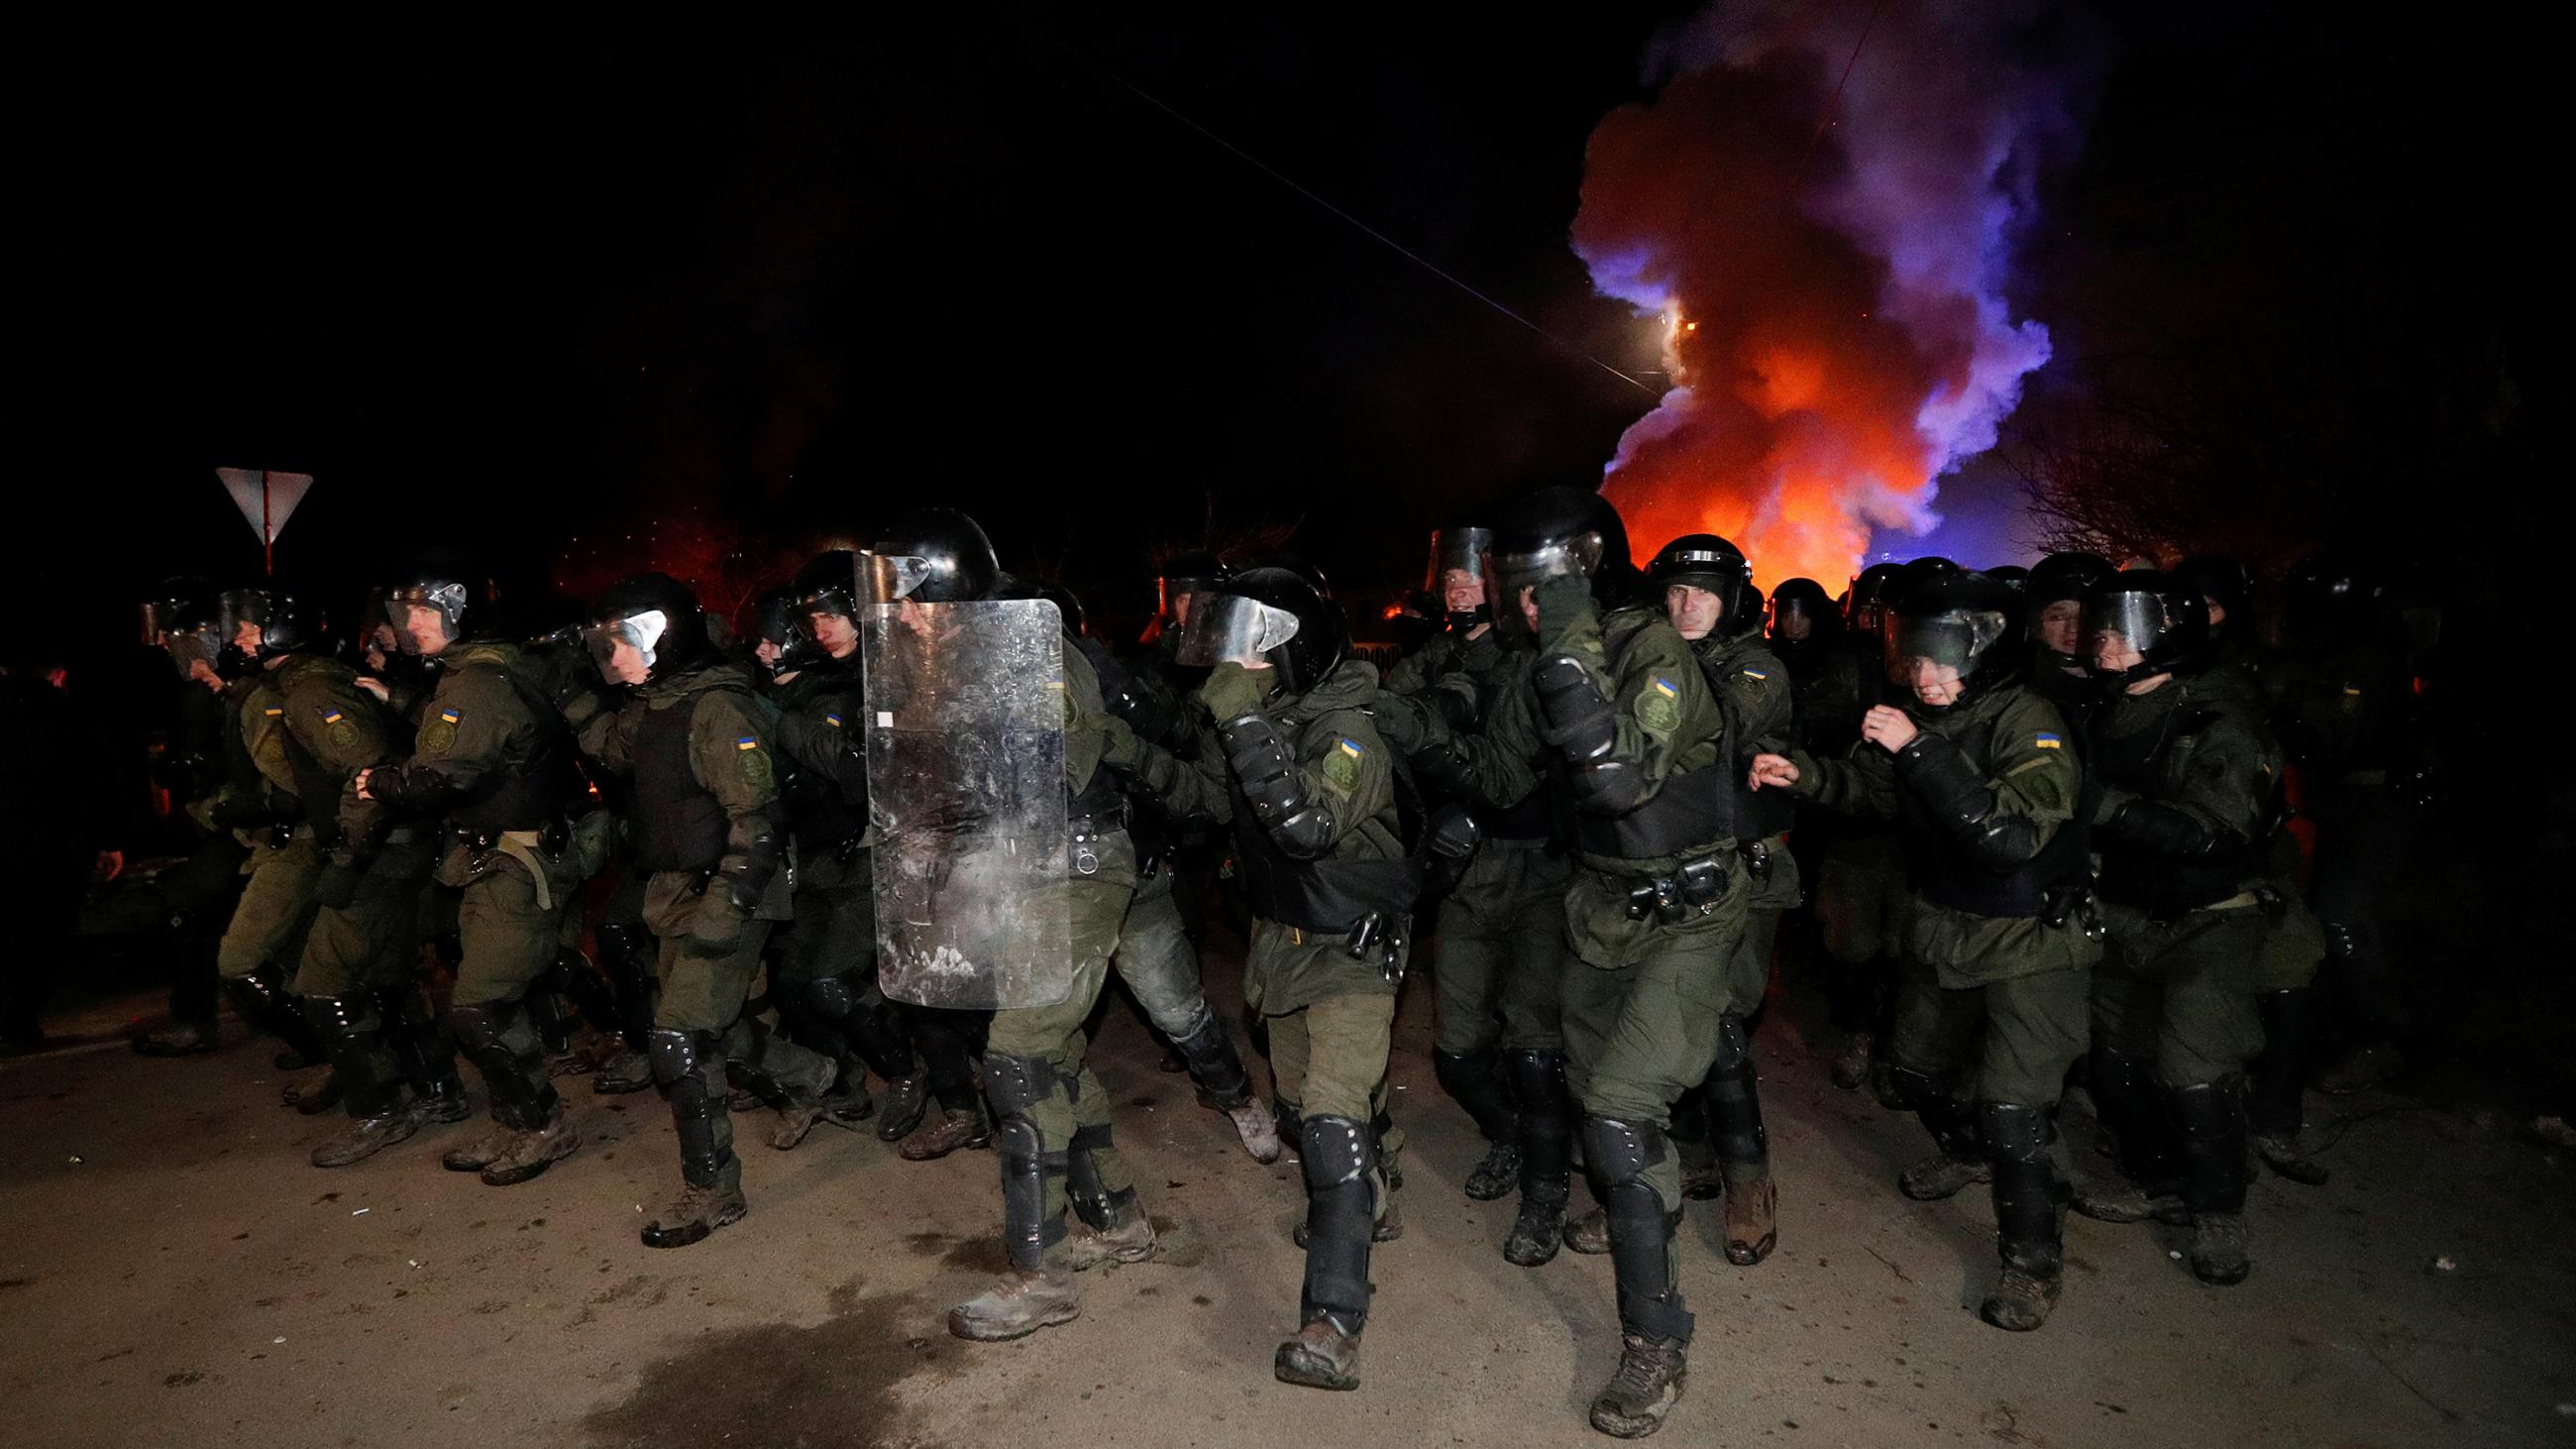 Picture shows more than a dozen officers wearing full riot gear advancing toward the camera at night. Behind them smoke rises and is illuminated by bright orange and blue light, presumably from a police vehicle off camera. This is a stunning photo. 